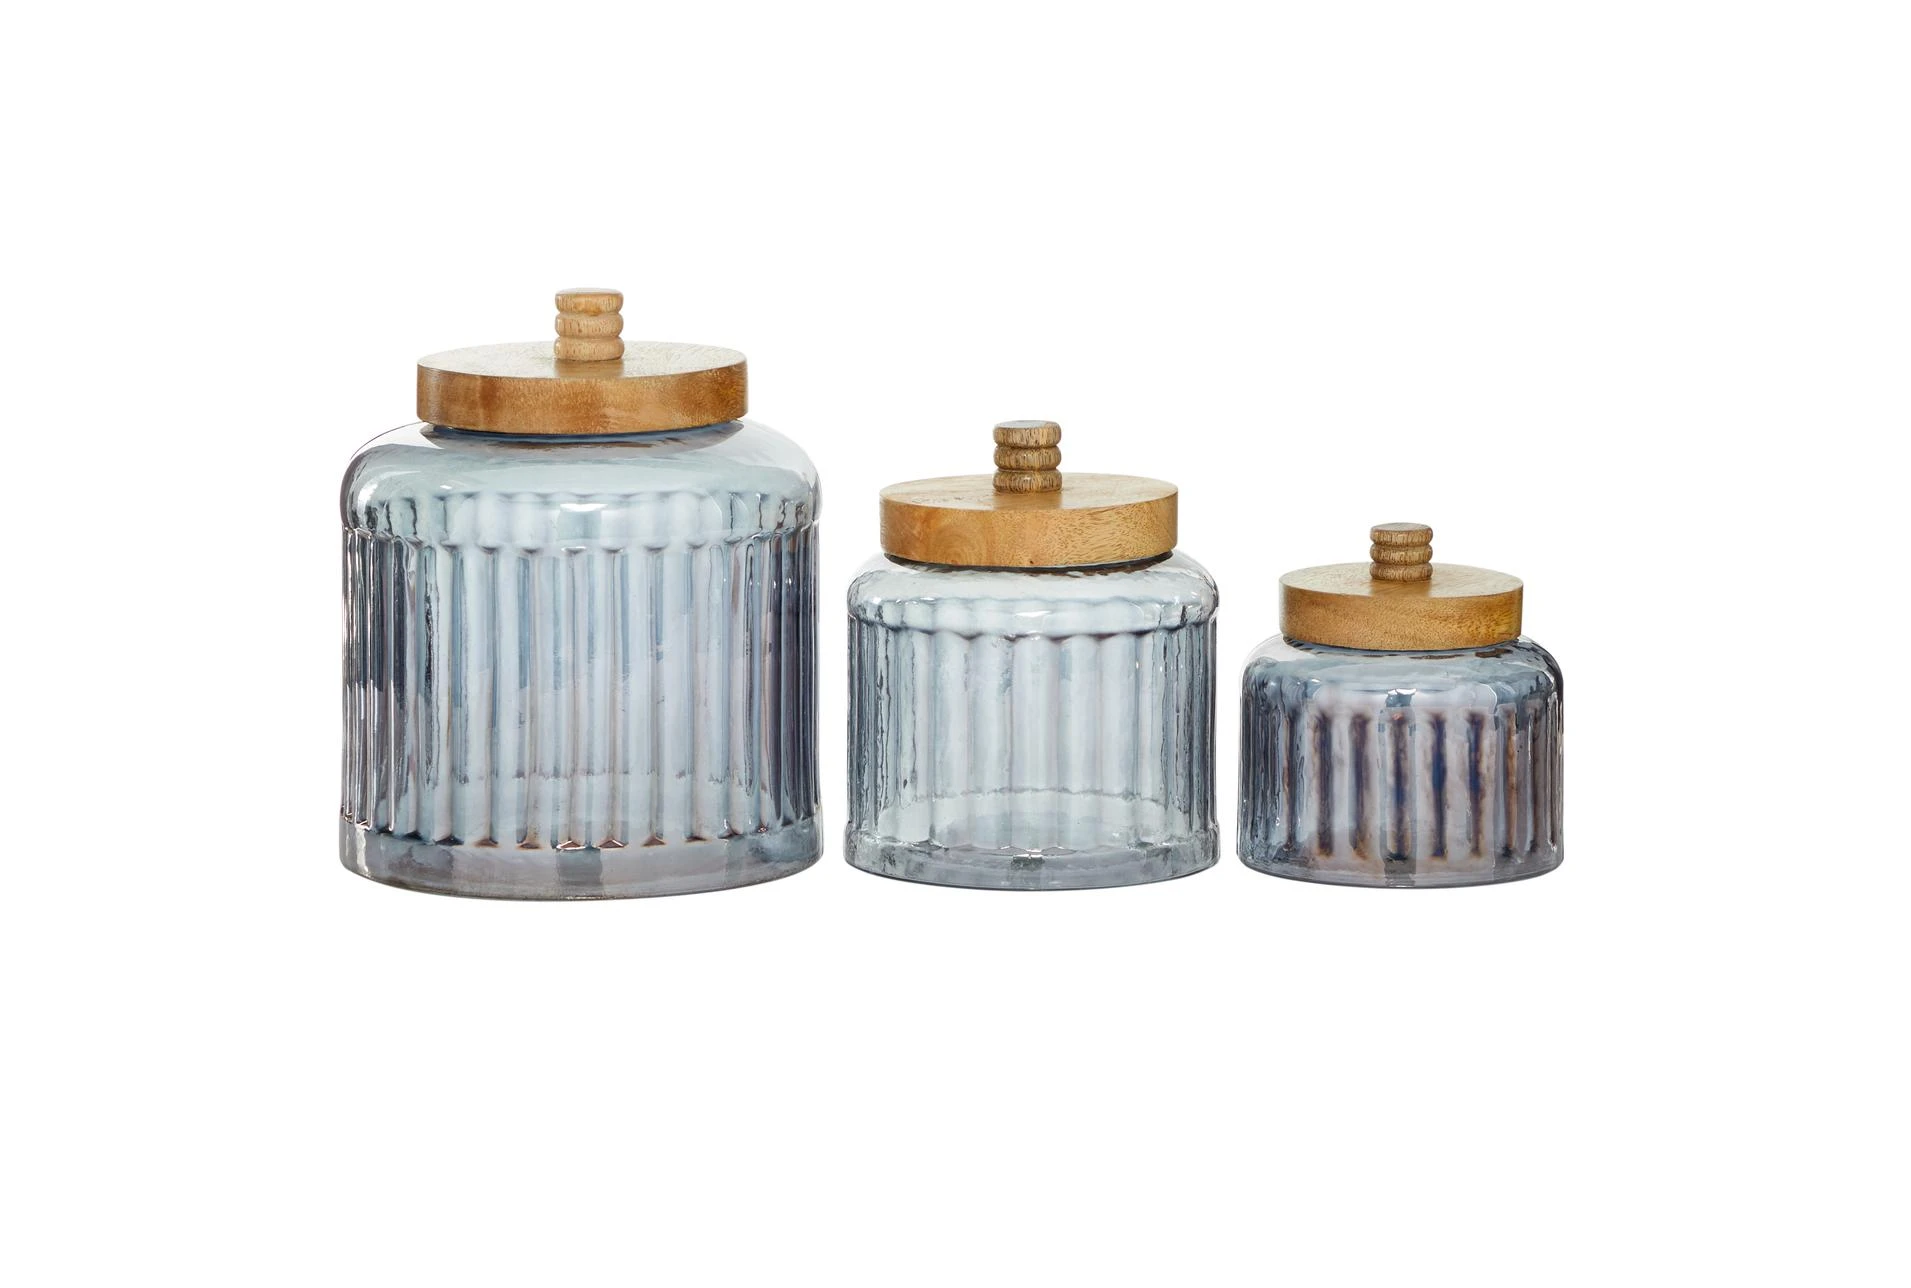 Set Of 3 Glass Jars With Wood Base and Lid - K&K Interiors